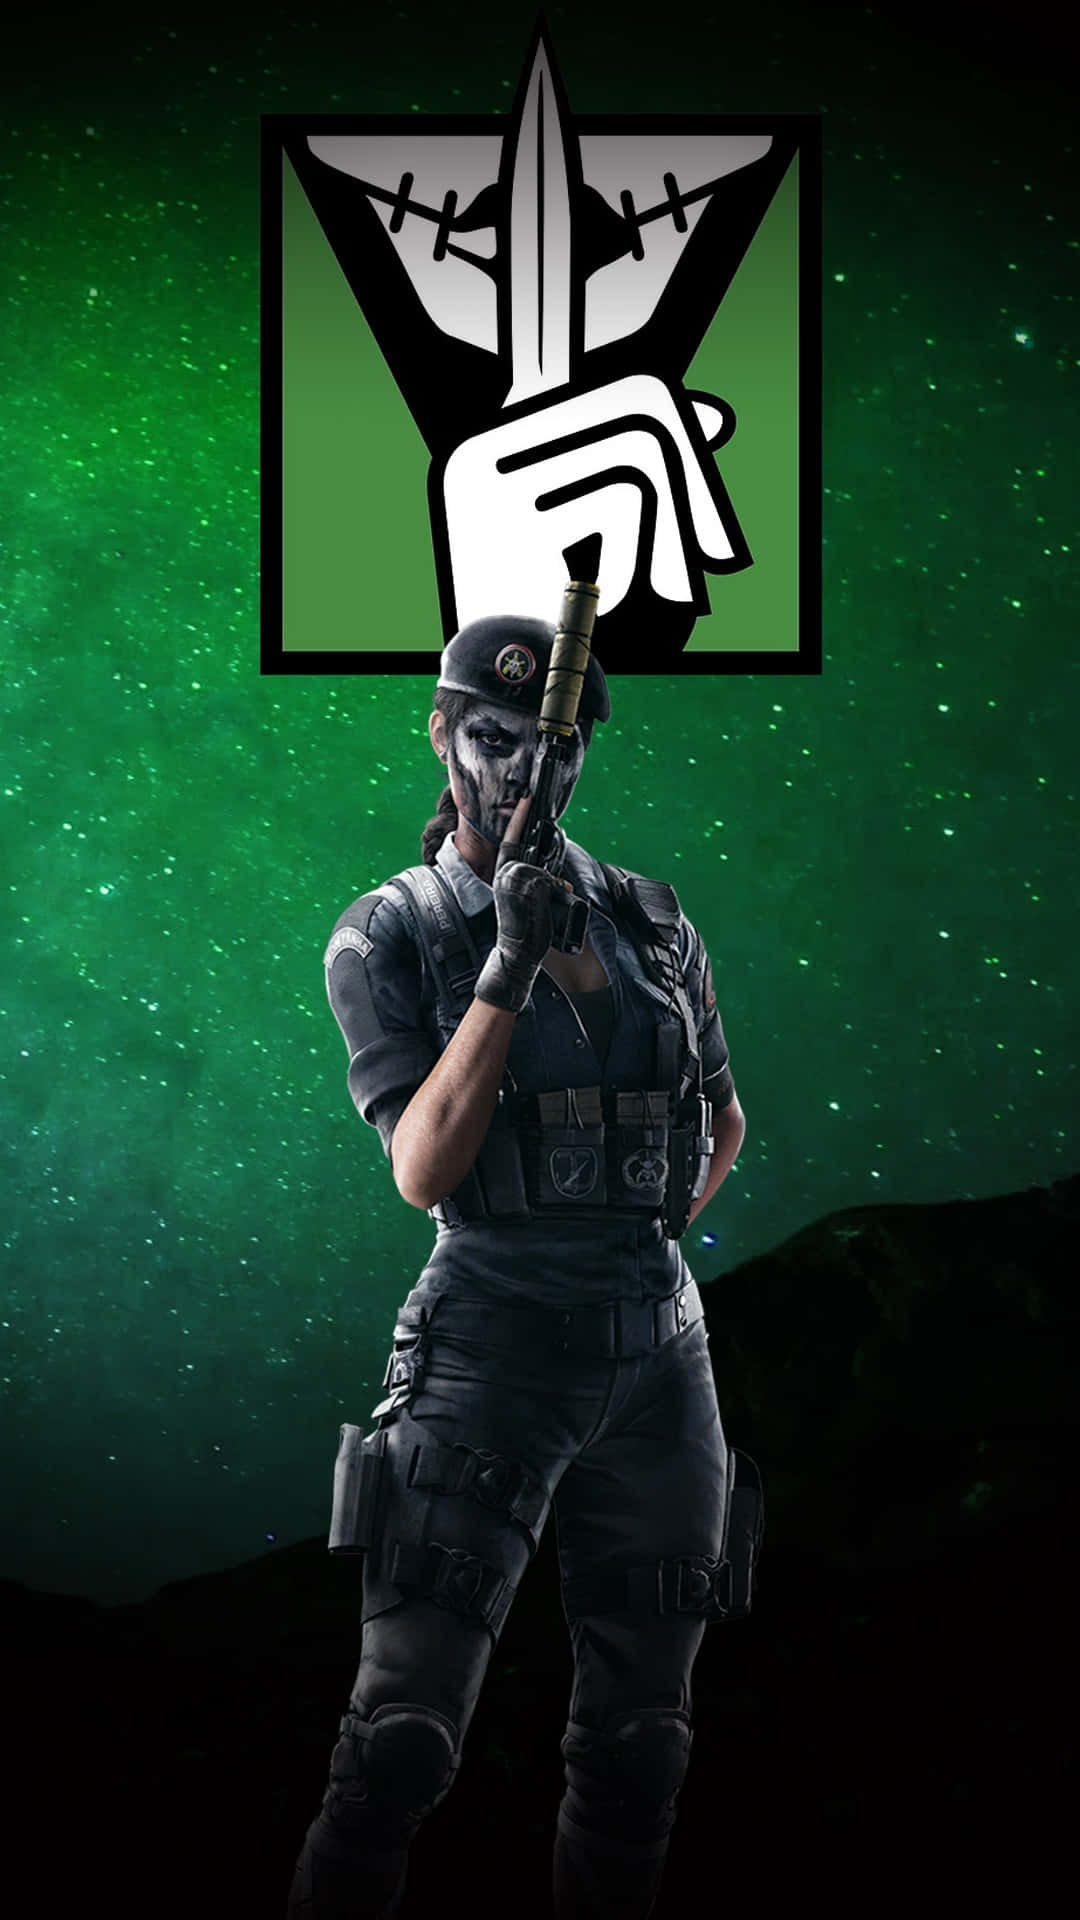 Caveira from Rainbow Six Siege in action Wallpaper